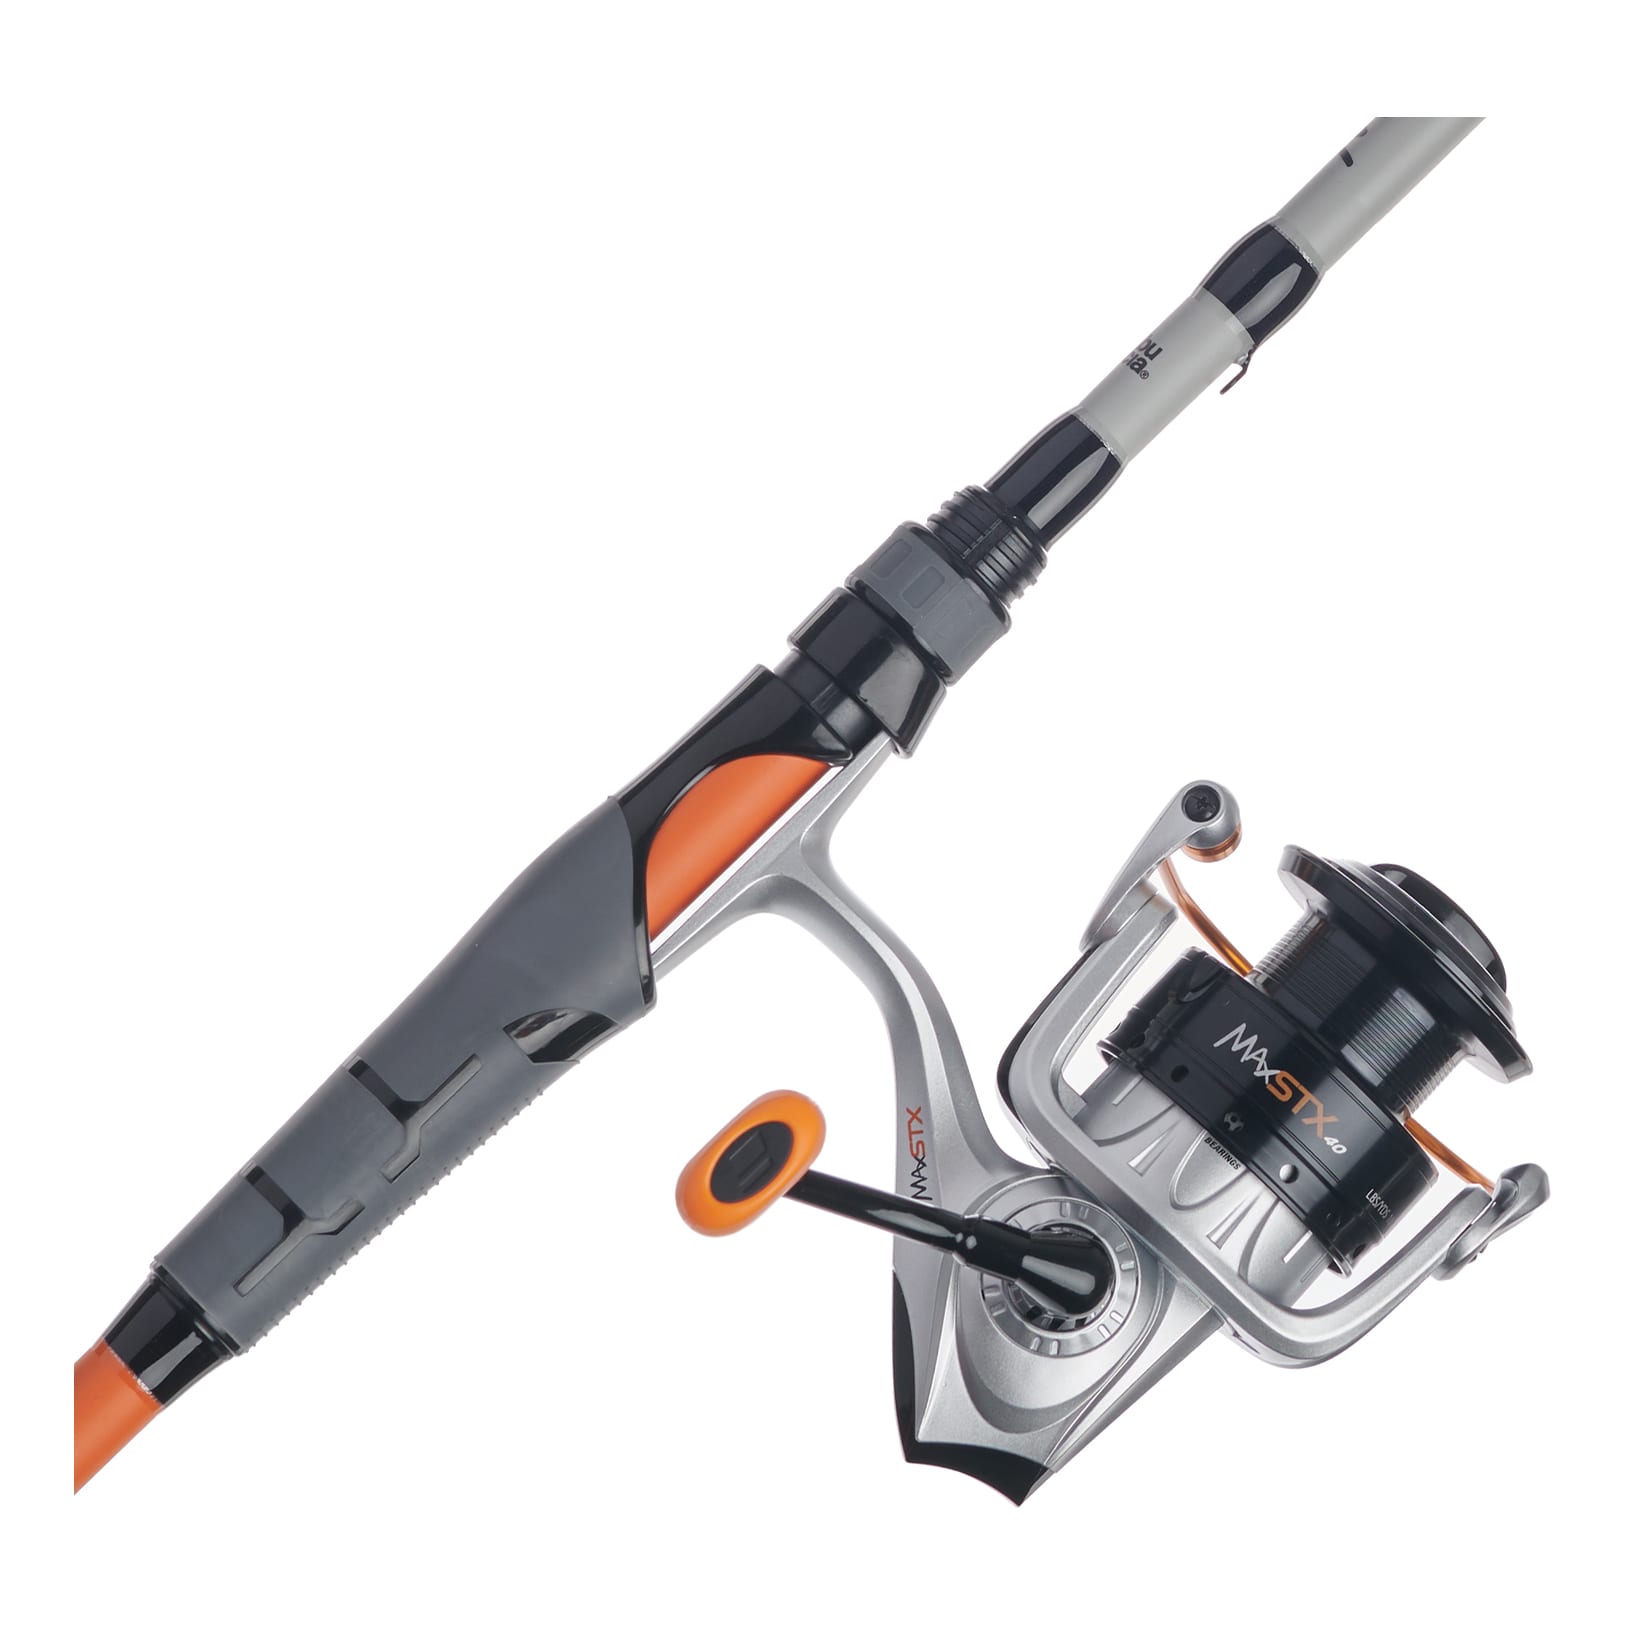 Abu Garcia Rod & Reel Combos  Curbside Pickup Available at DICK'S